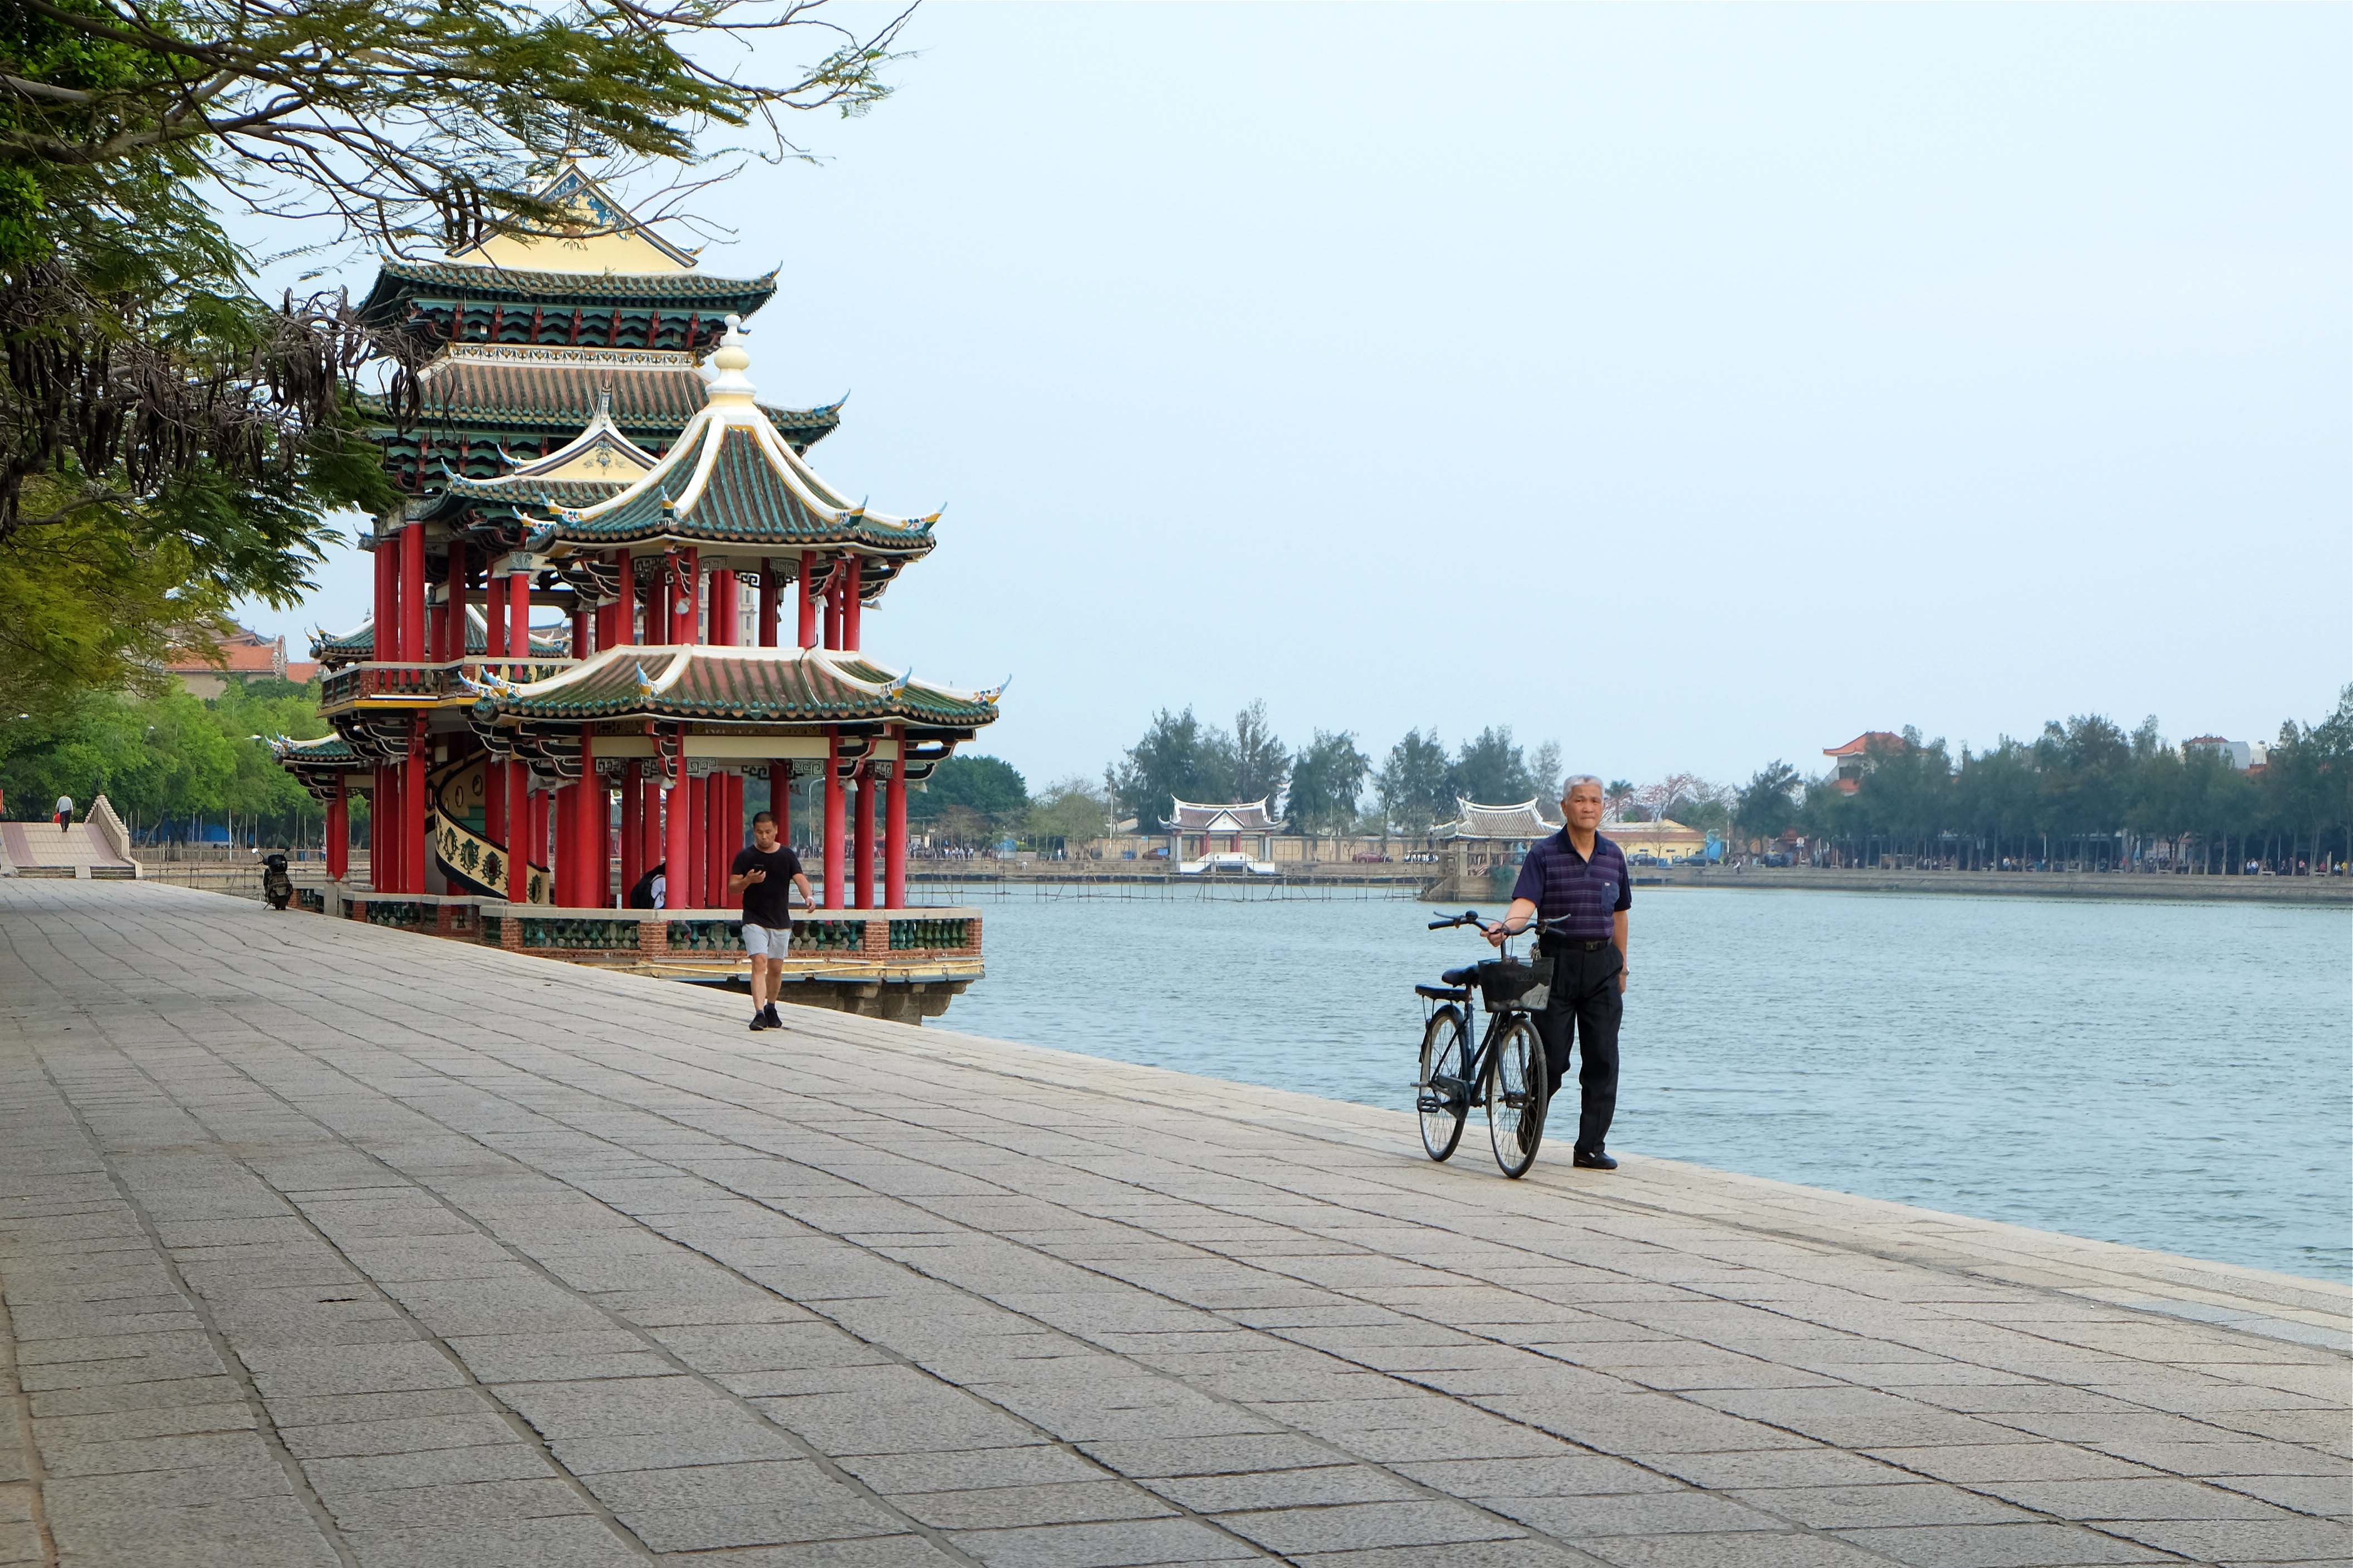 Planning to visit or work in China? Forget these 10 habits!